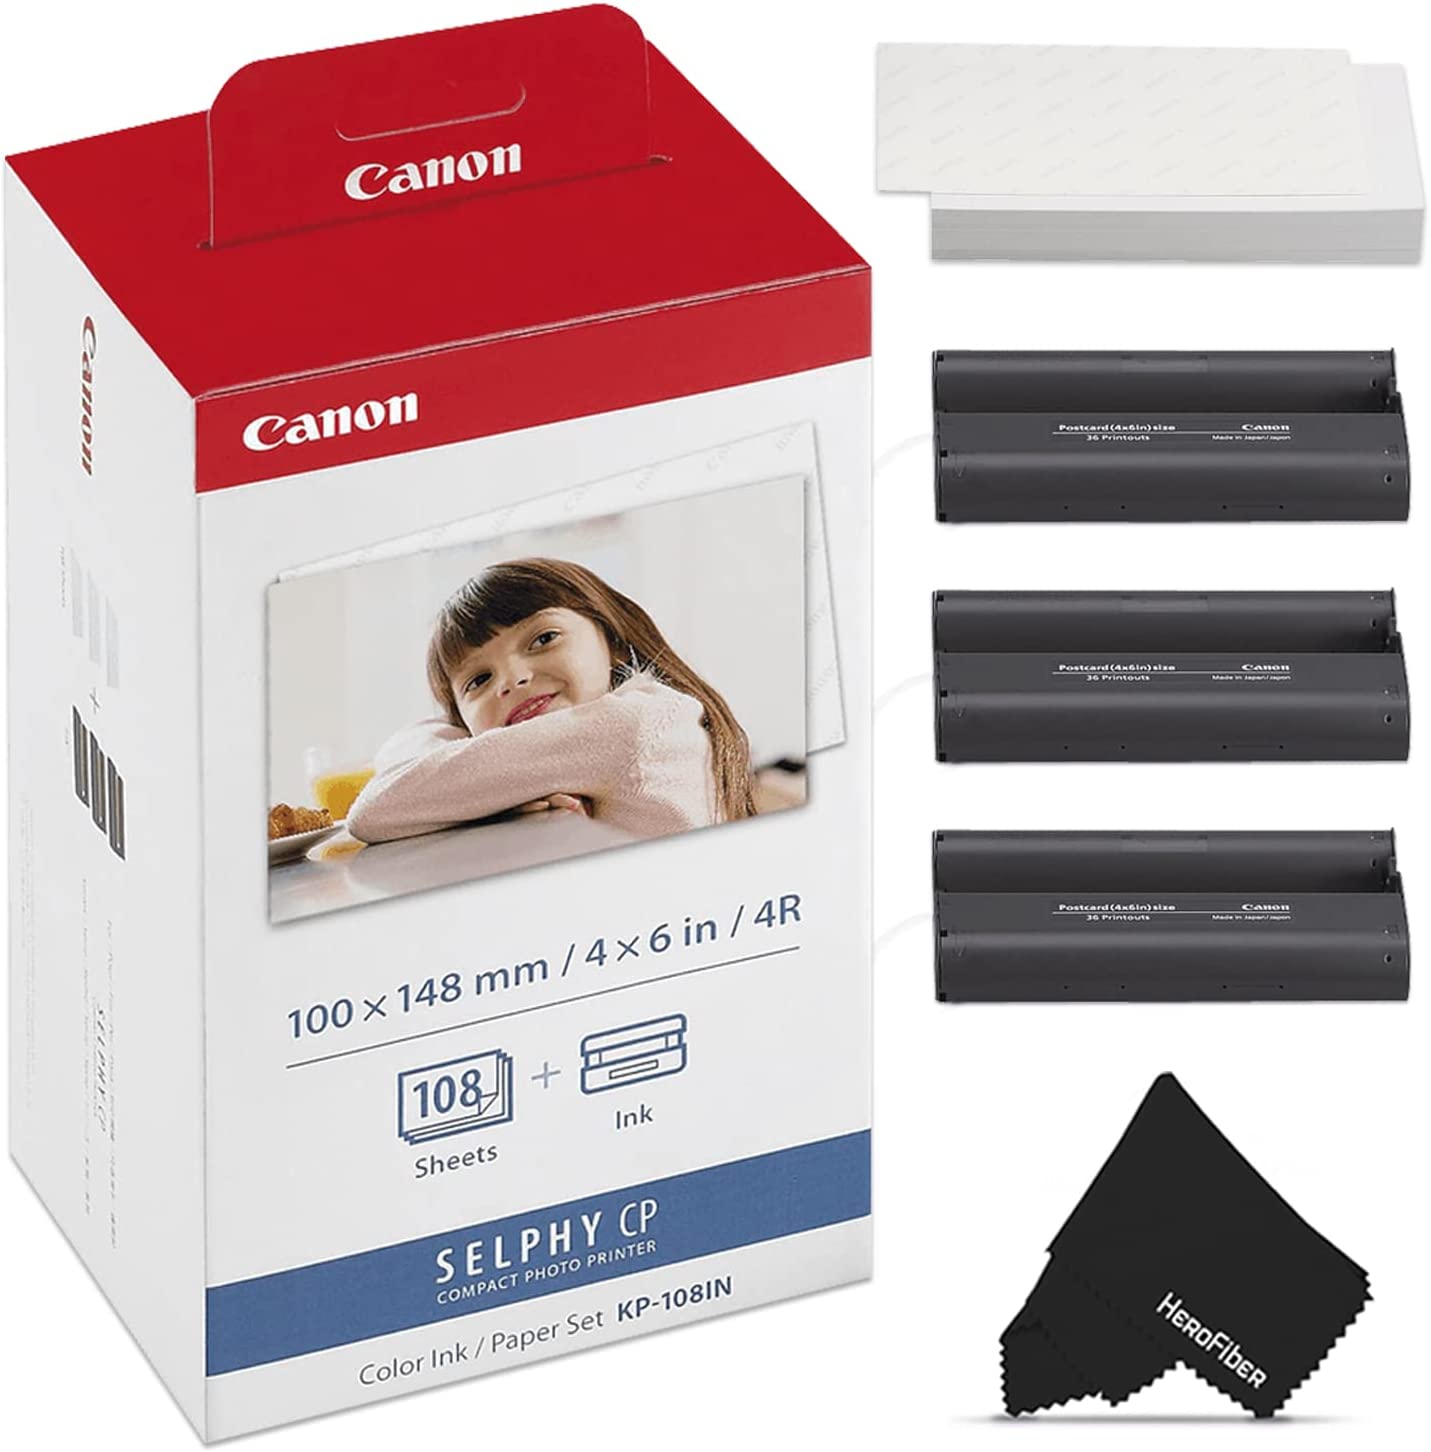 Canon KP-108IN / KP108 Color Ink Paper Includes 108 Ink Paper Sheets + 3 Ink Toners for Canon Selphy Cp1300, Cp1200, Cp910, Cp900, Cp770, CP760